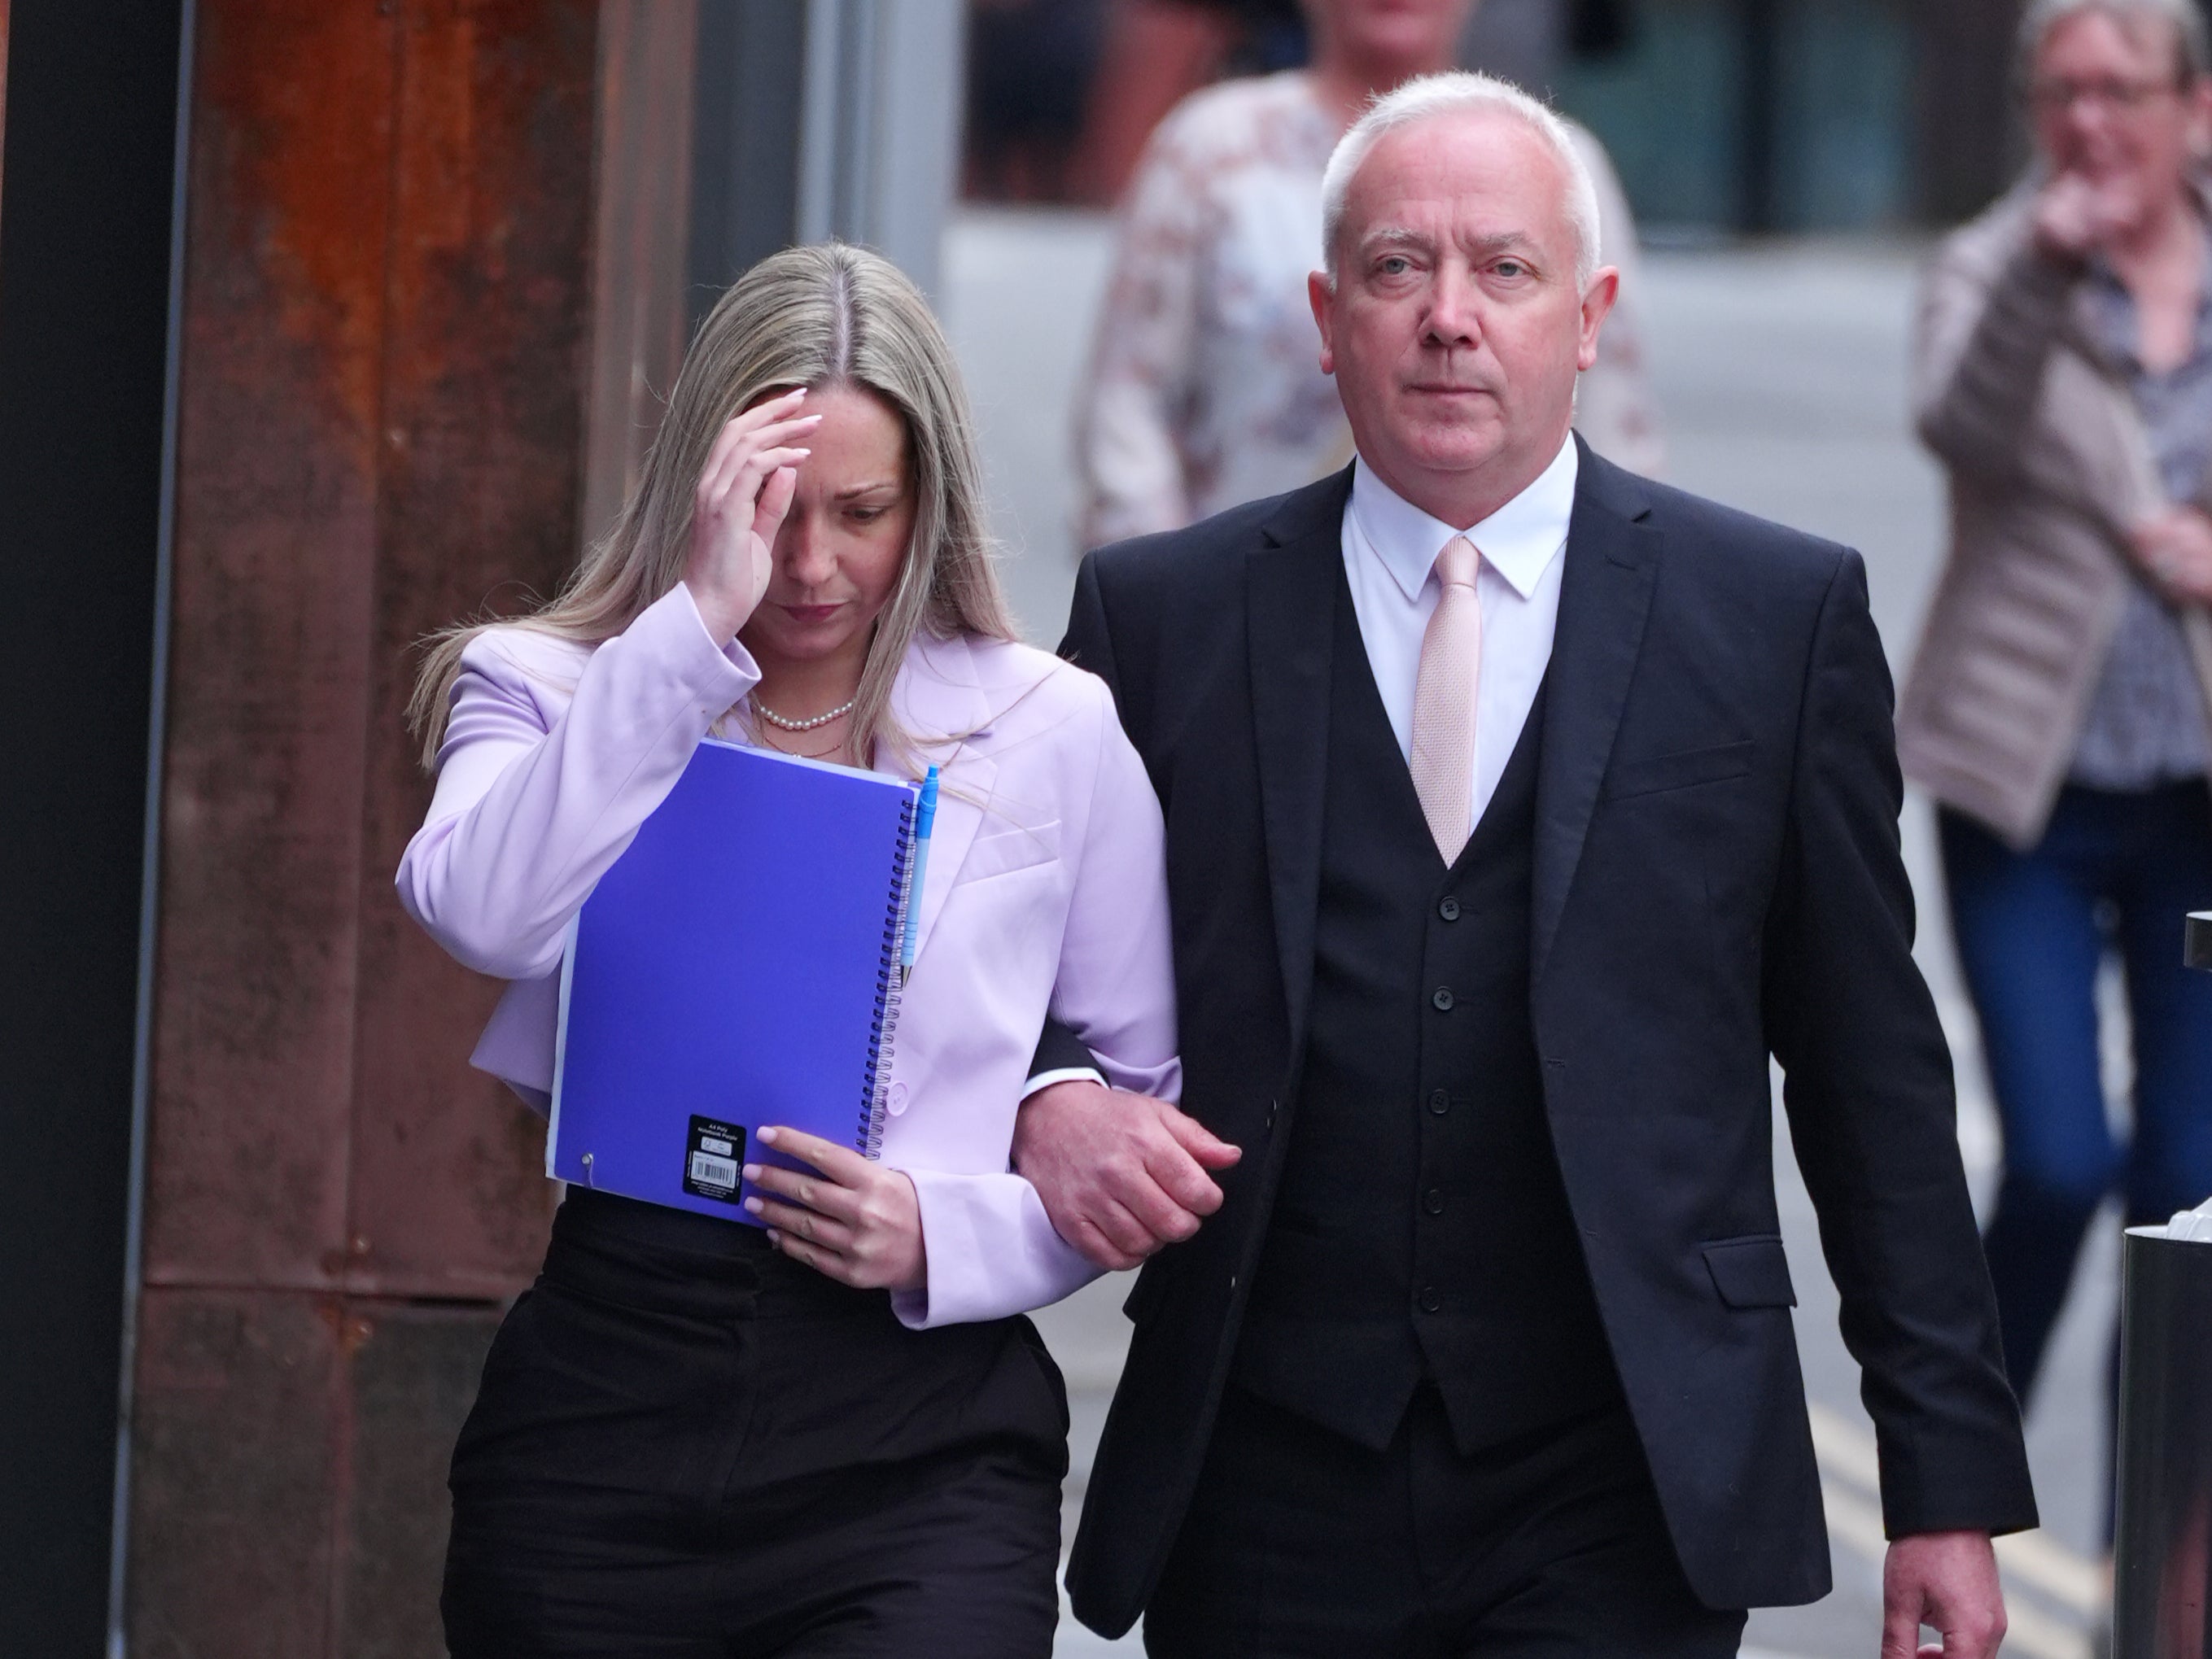 Joynes arriving at Manchester Crown Court on Monday